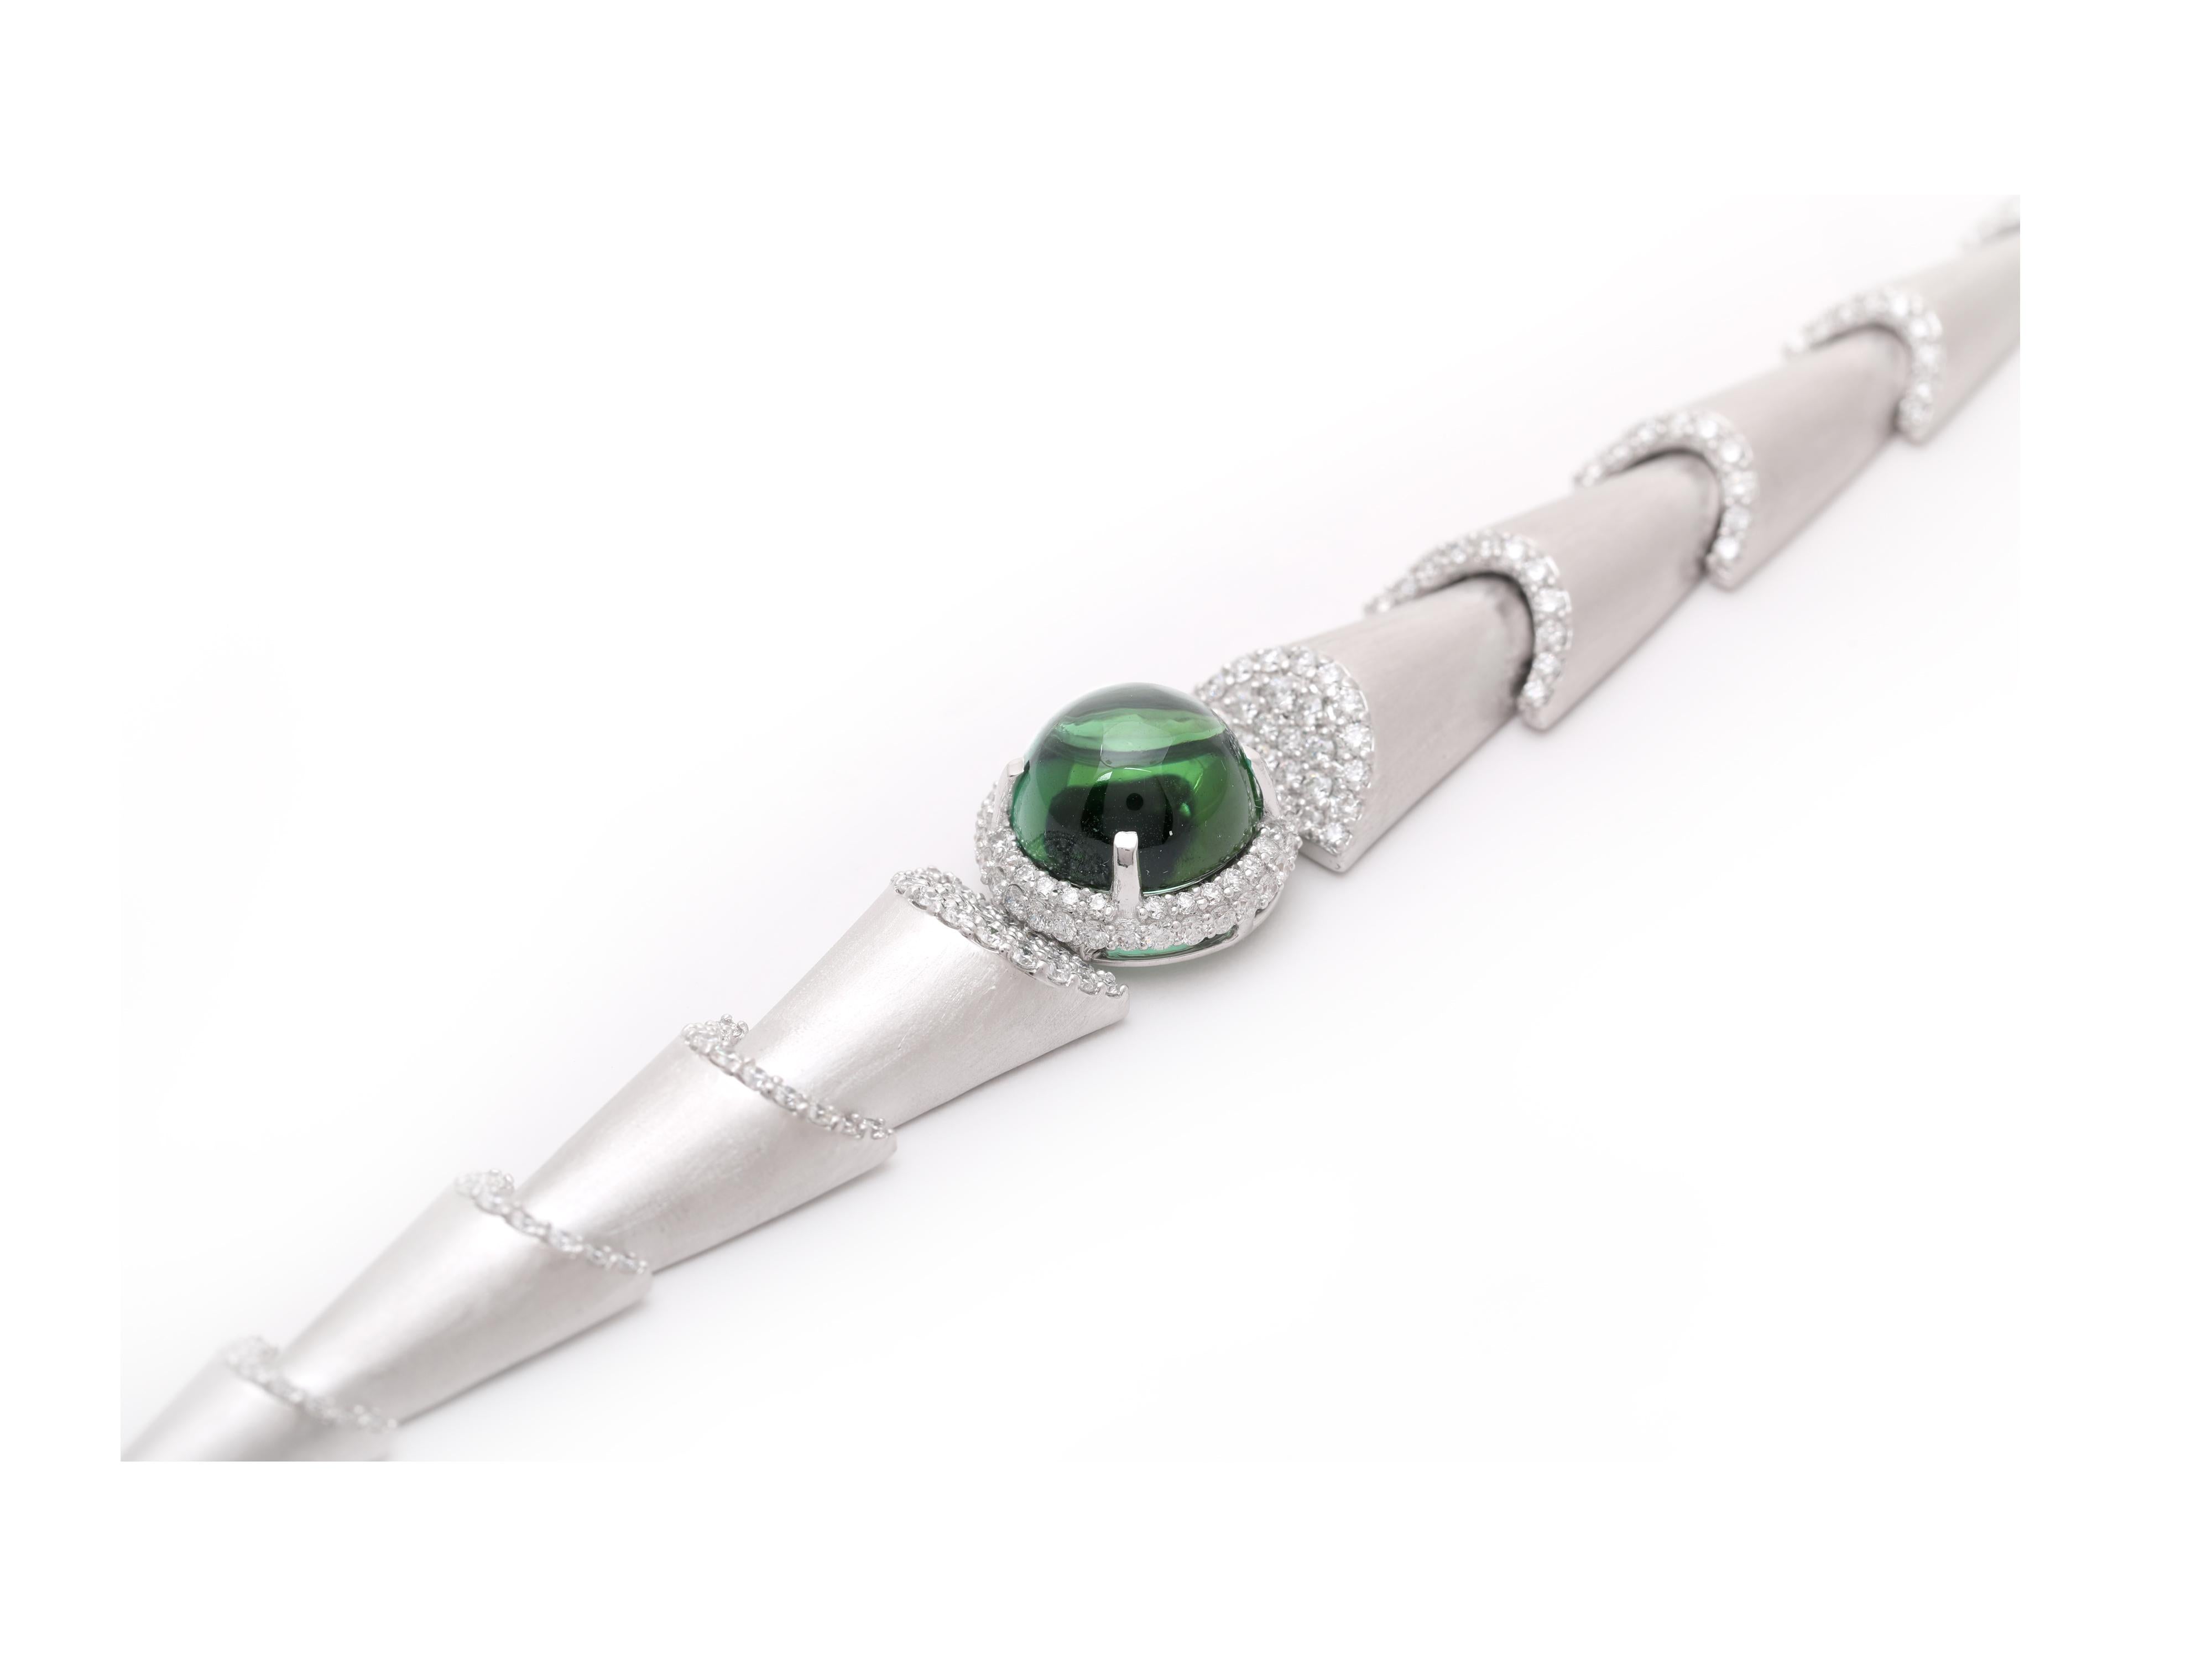 An stunning 6.87 carat green tourmaline cabochon lies at the heart of this exquisitely crafted diamond bracelet in 18k white gold.

The tapering design and cascading elements combine to achieve the impression of movement, while the textured gold